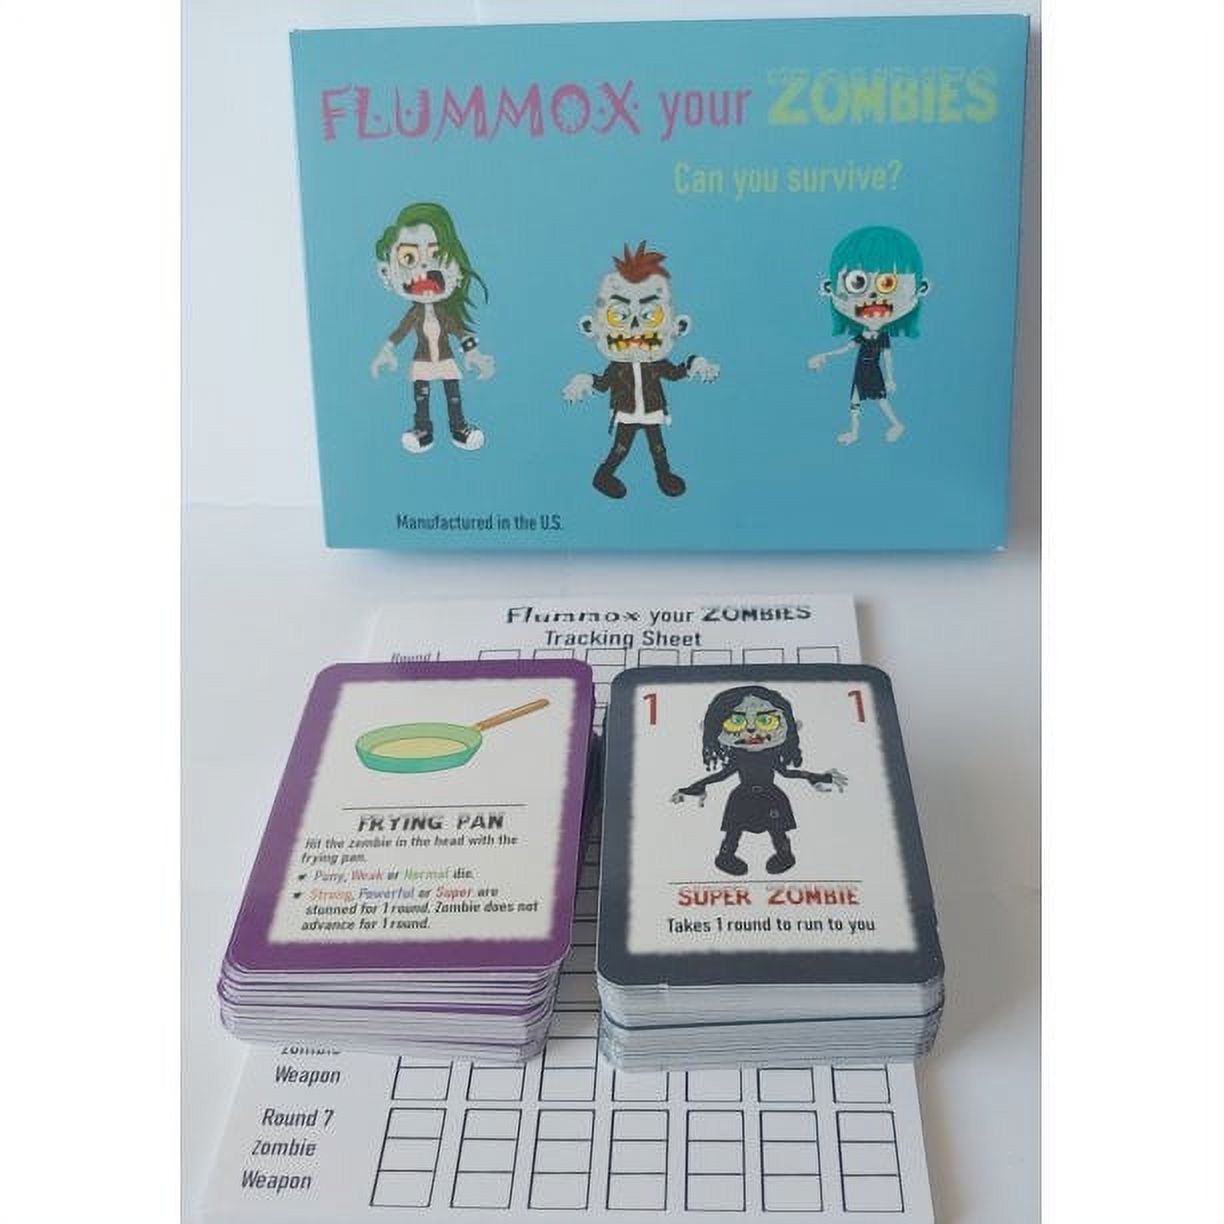 Flummox your Zombies - image 1 of 5